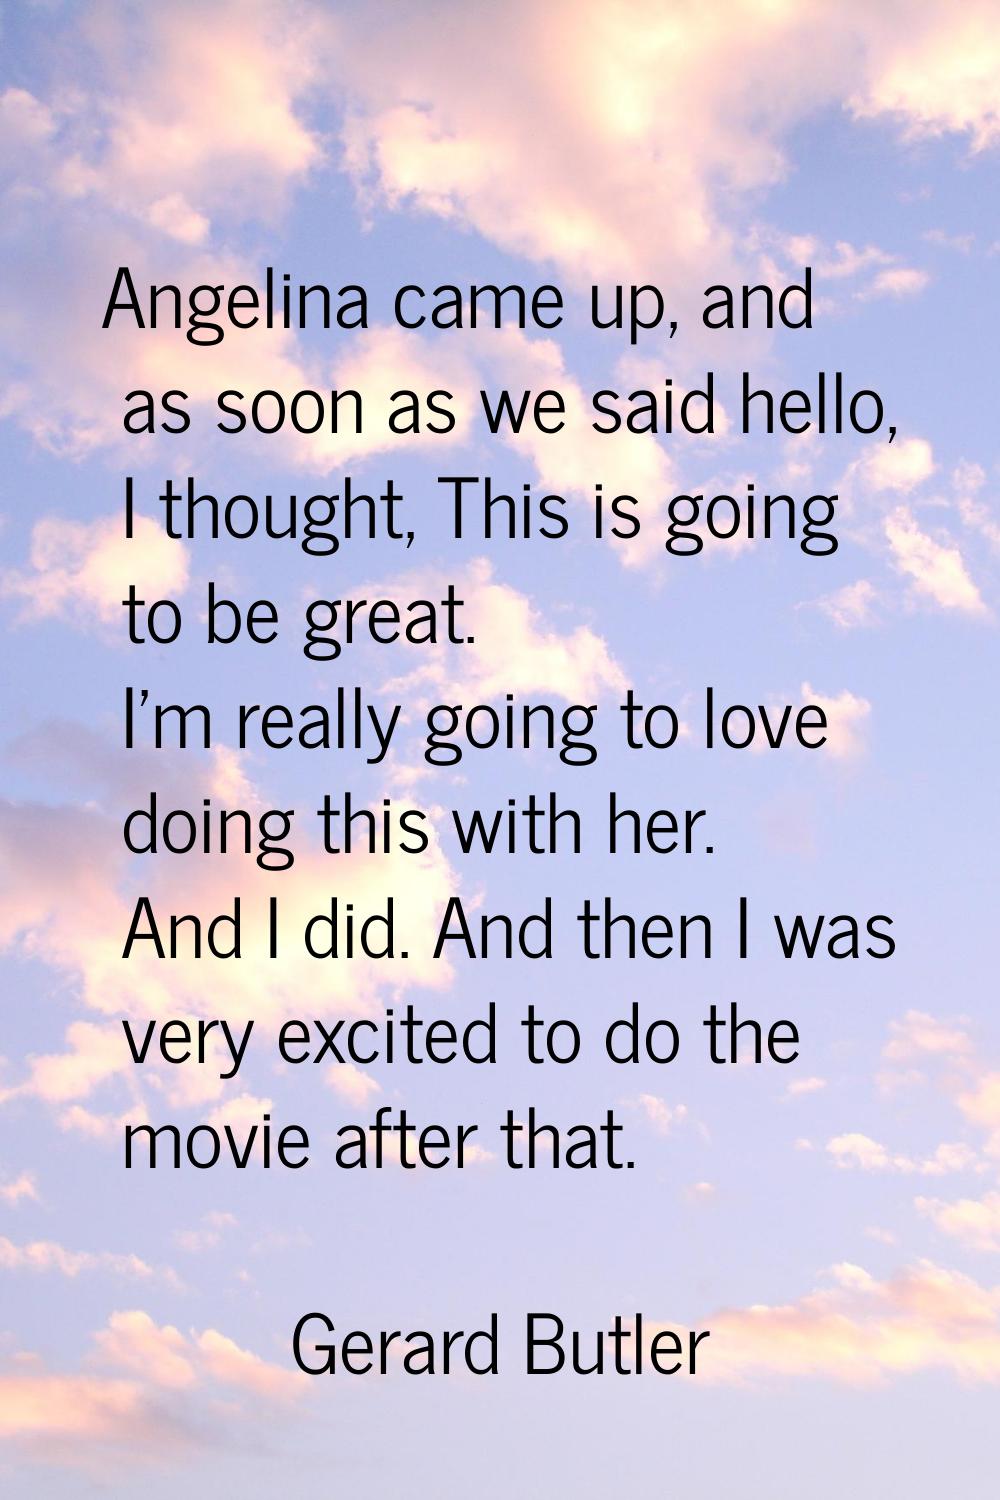 Angelina came up, and as soon as we said hello, I thought, This is going to be great. I'm really go